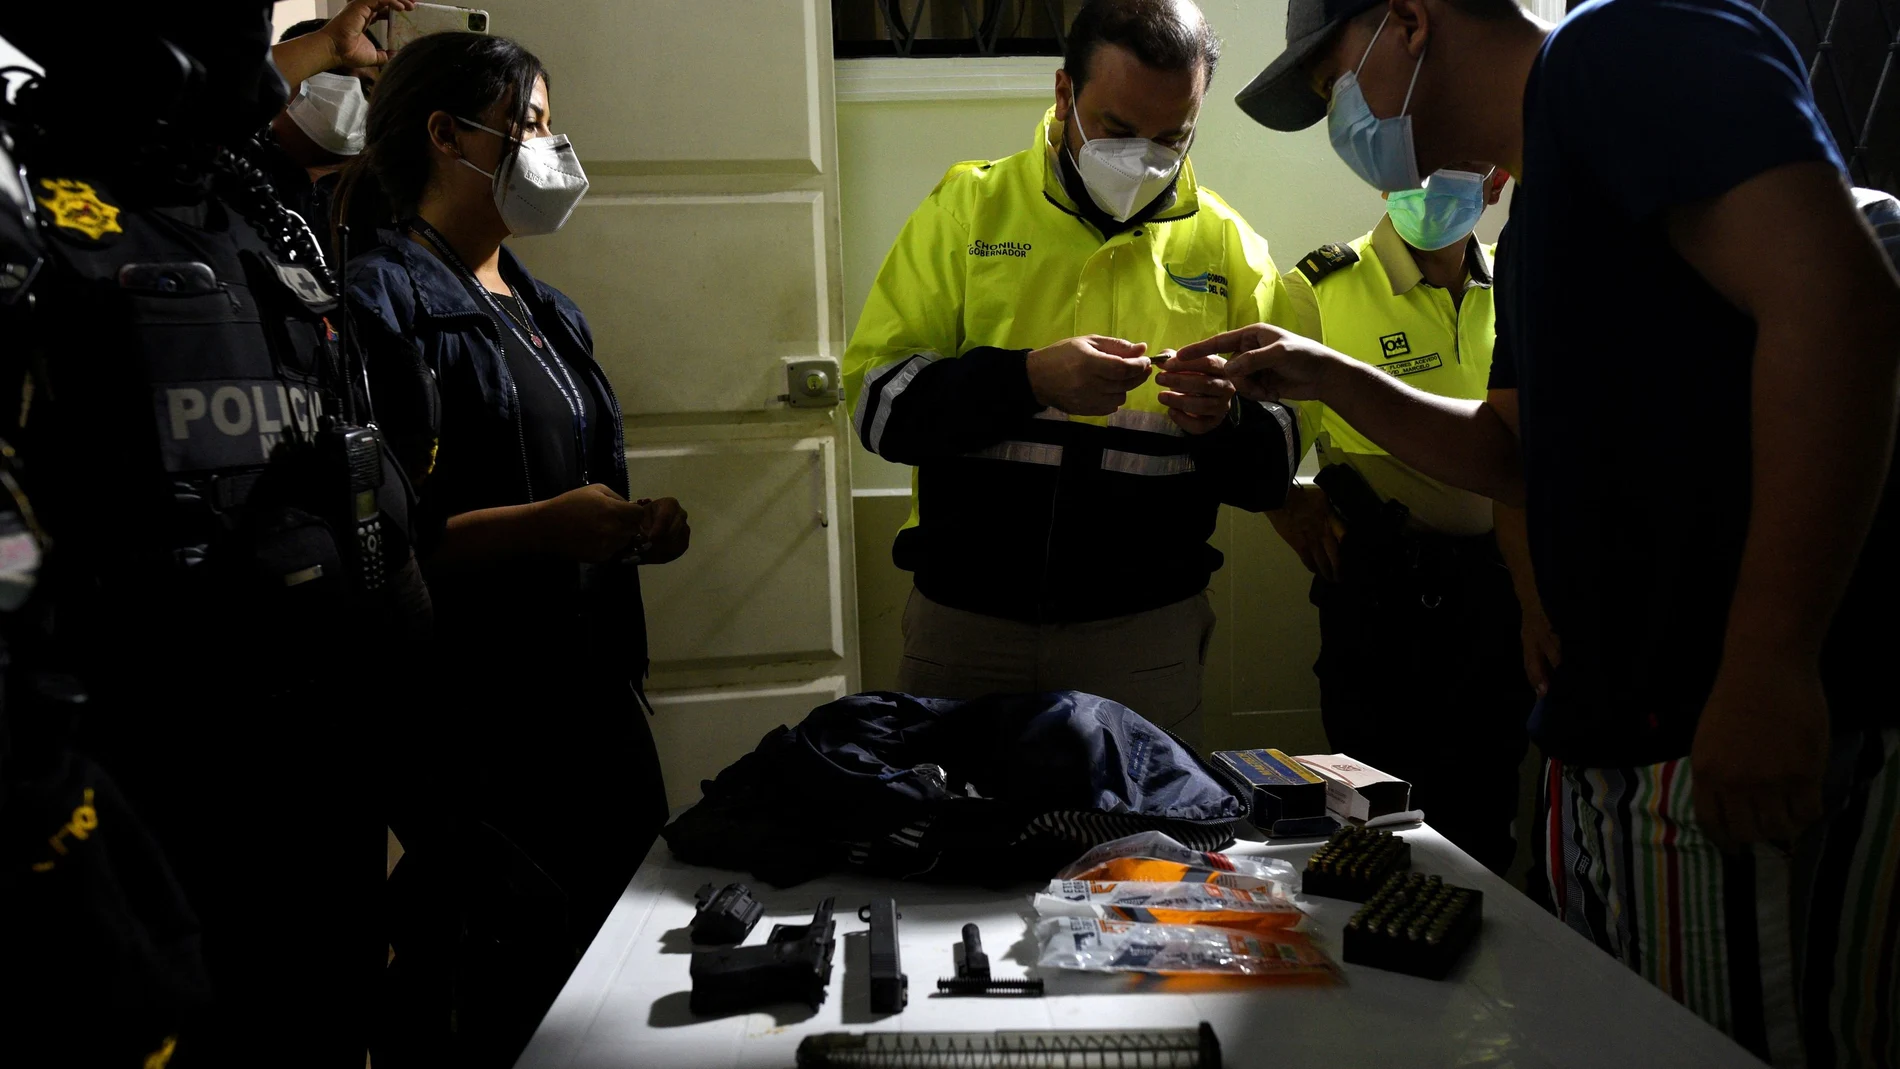 A policeman checks the ID of a man during a police operation to tackle COVID-19 restrictions violations, amid a rise in coronavirus disease cases and deaths, in Guayaquil, Ecuador May 1, 2021. Picture taken May 1, 2021. REUTERS/Santiago Arcos